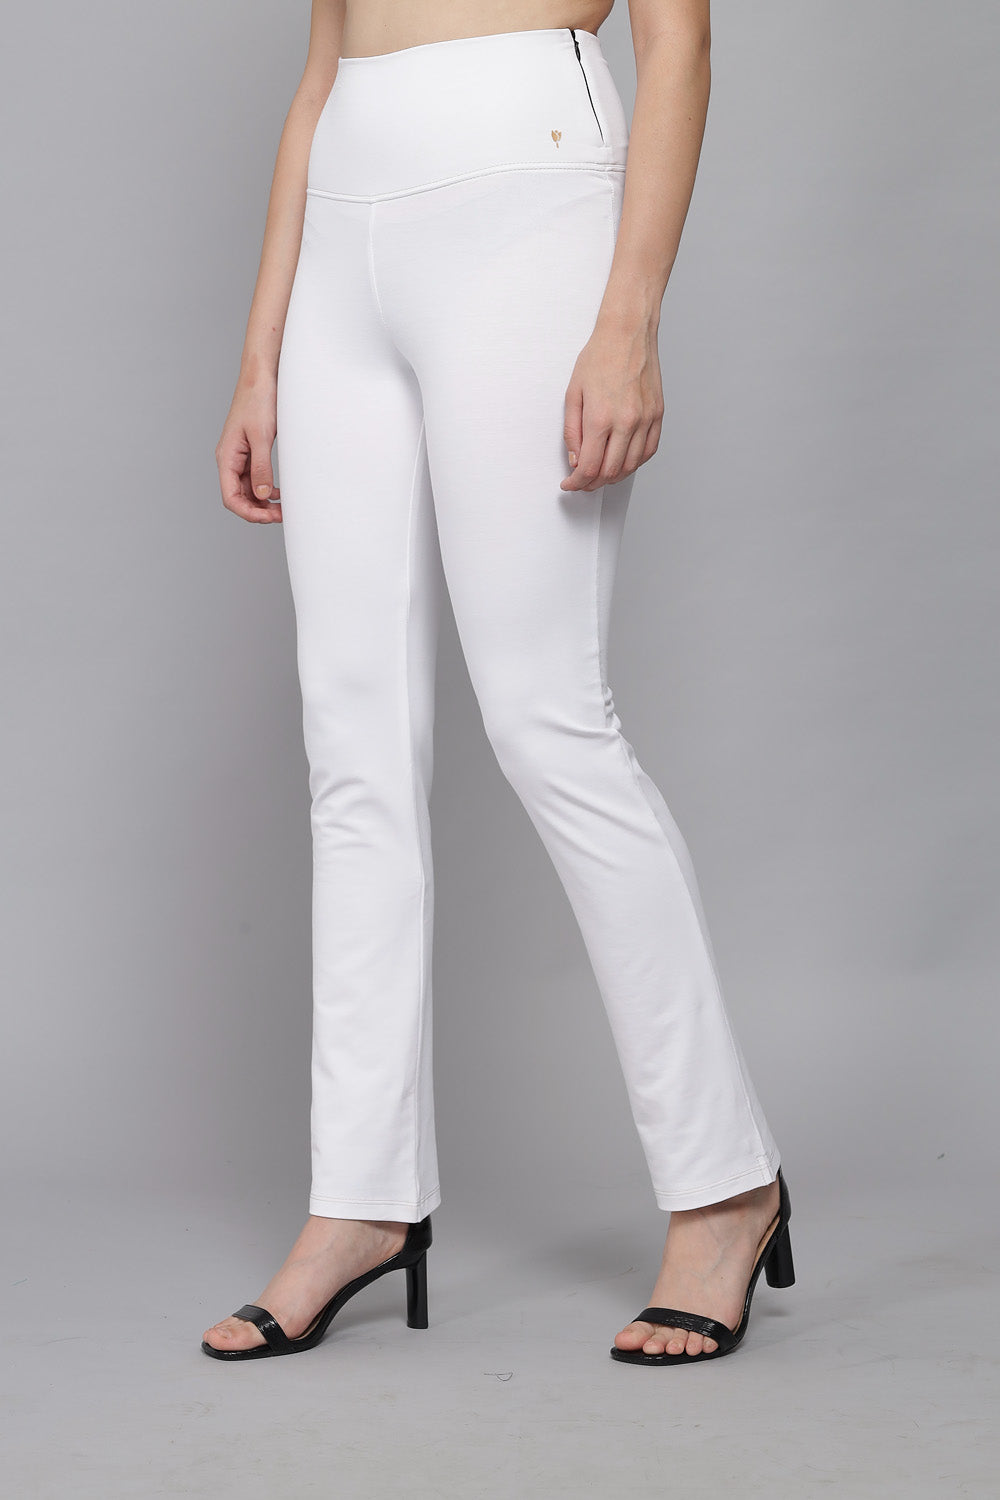 Skinny Fit Jeans - White - Kids | H&M IN